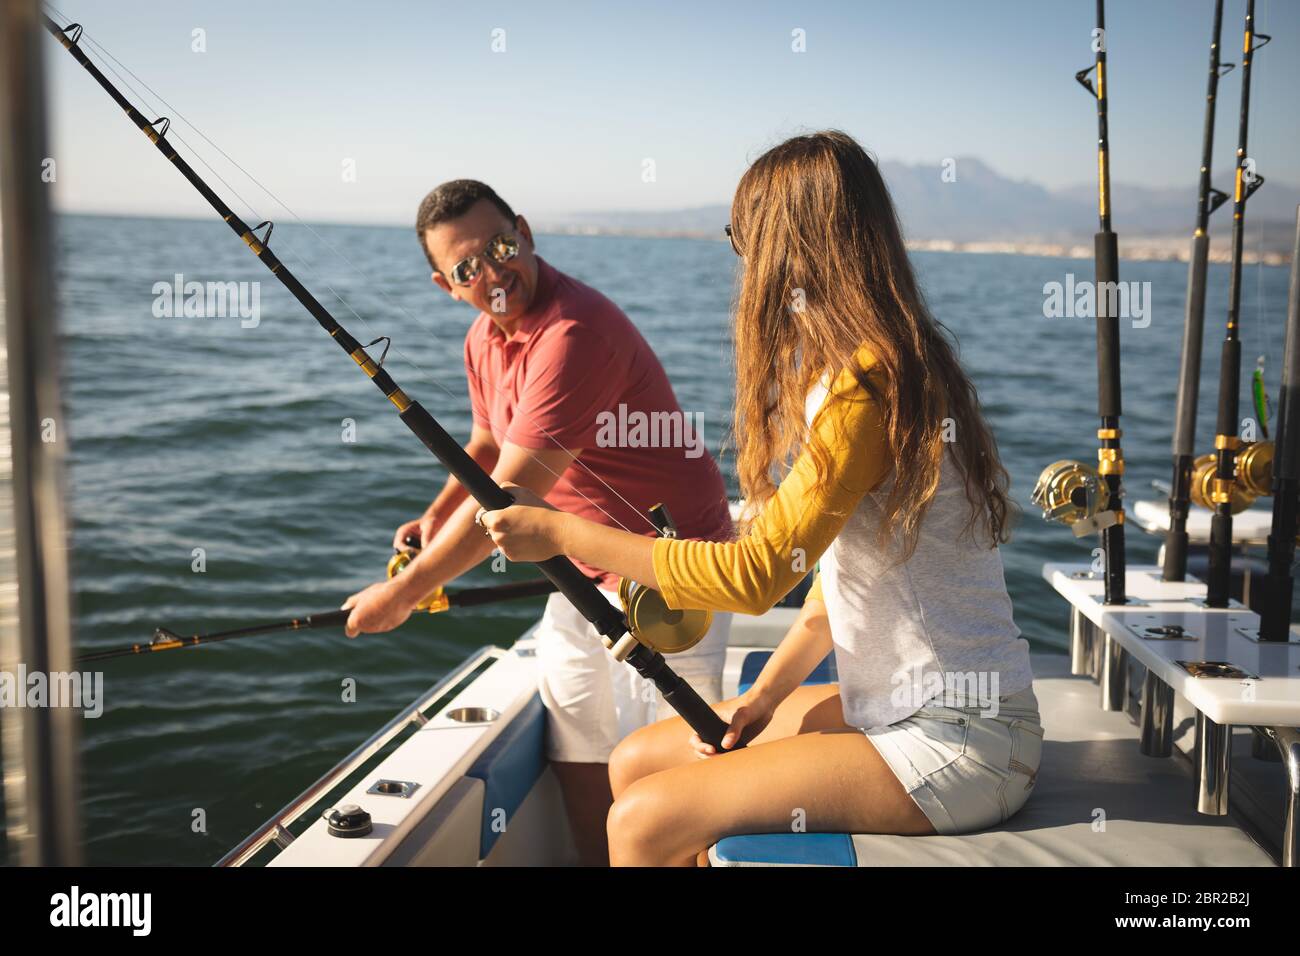 https://c8.alamy.com/comp/2BR2B2J/a-caucasian-man-and-his-teenage-daughter-holding-fishing-rods-and-talking-2BR2B2J.jpg